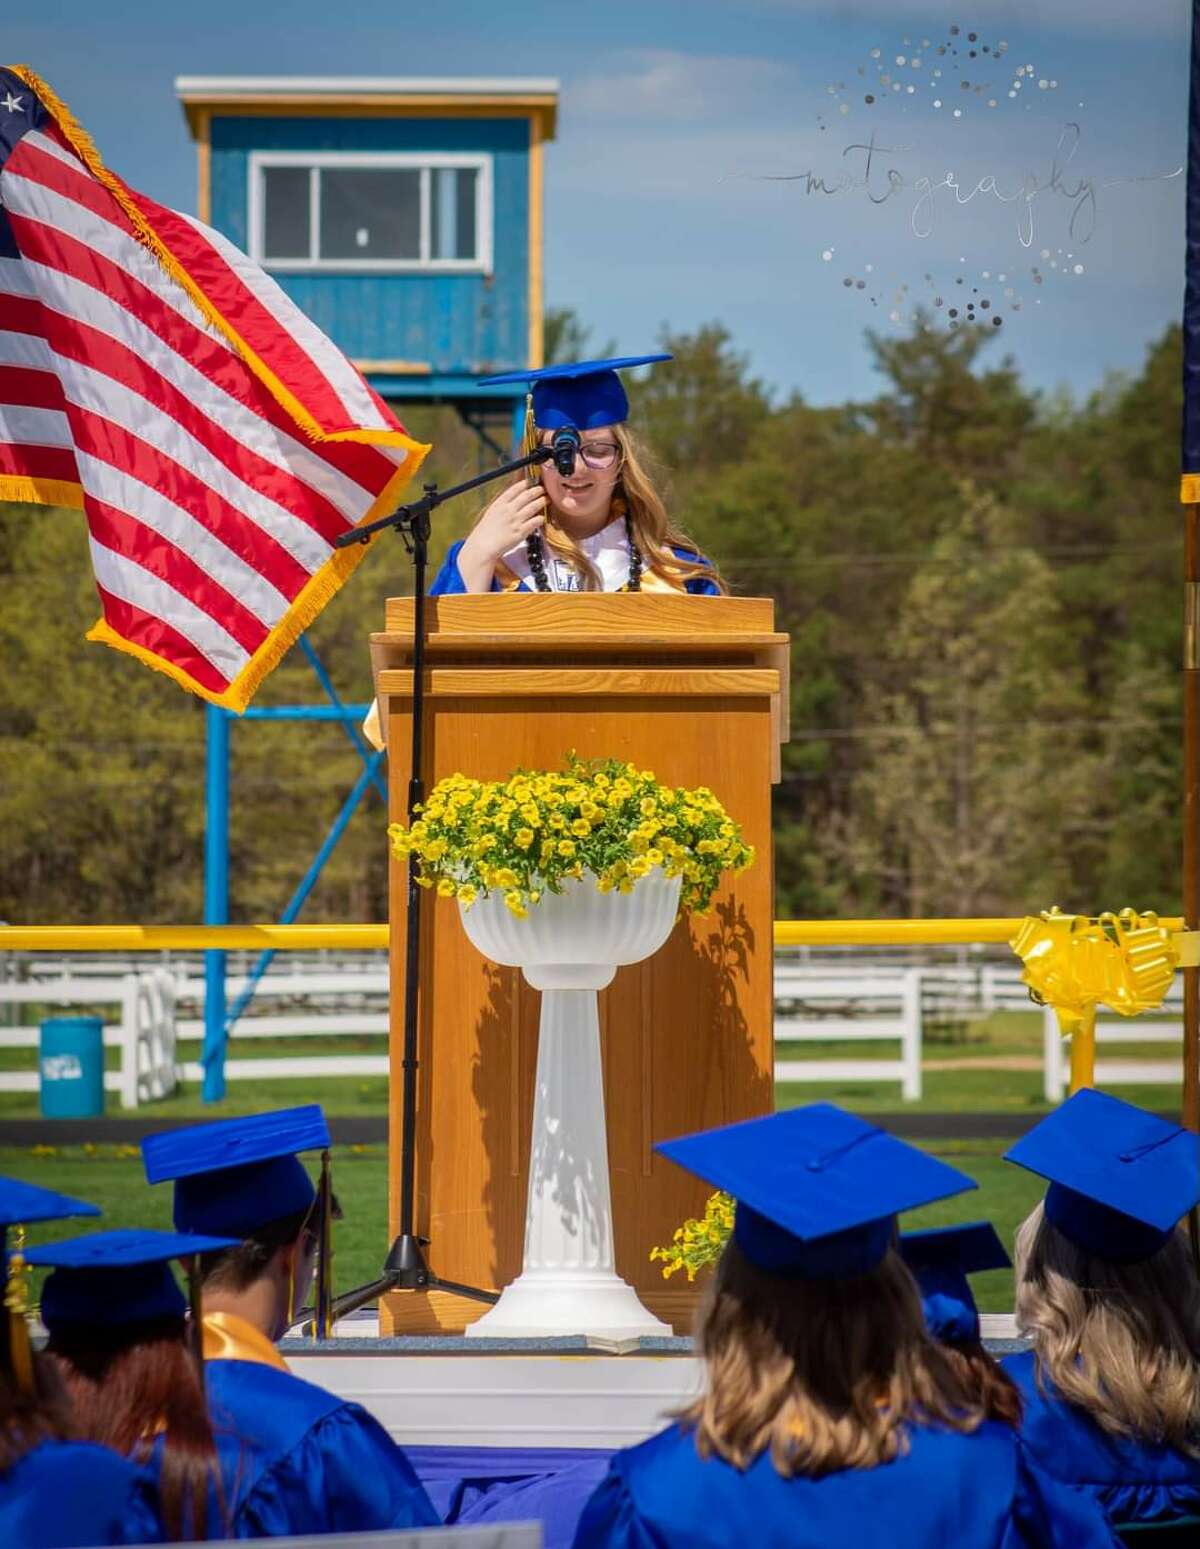 The Evart High School Class of 2022 held its commencement ceremony on May 15 at the Tom Smith Memorial Stadium. Valedictorian Samantha DePew addresses the graduates.